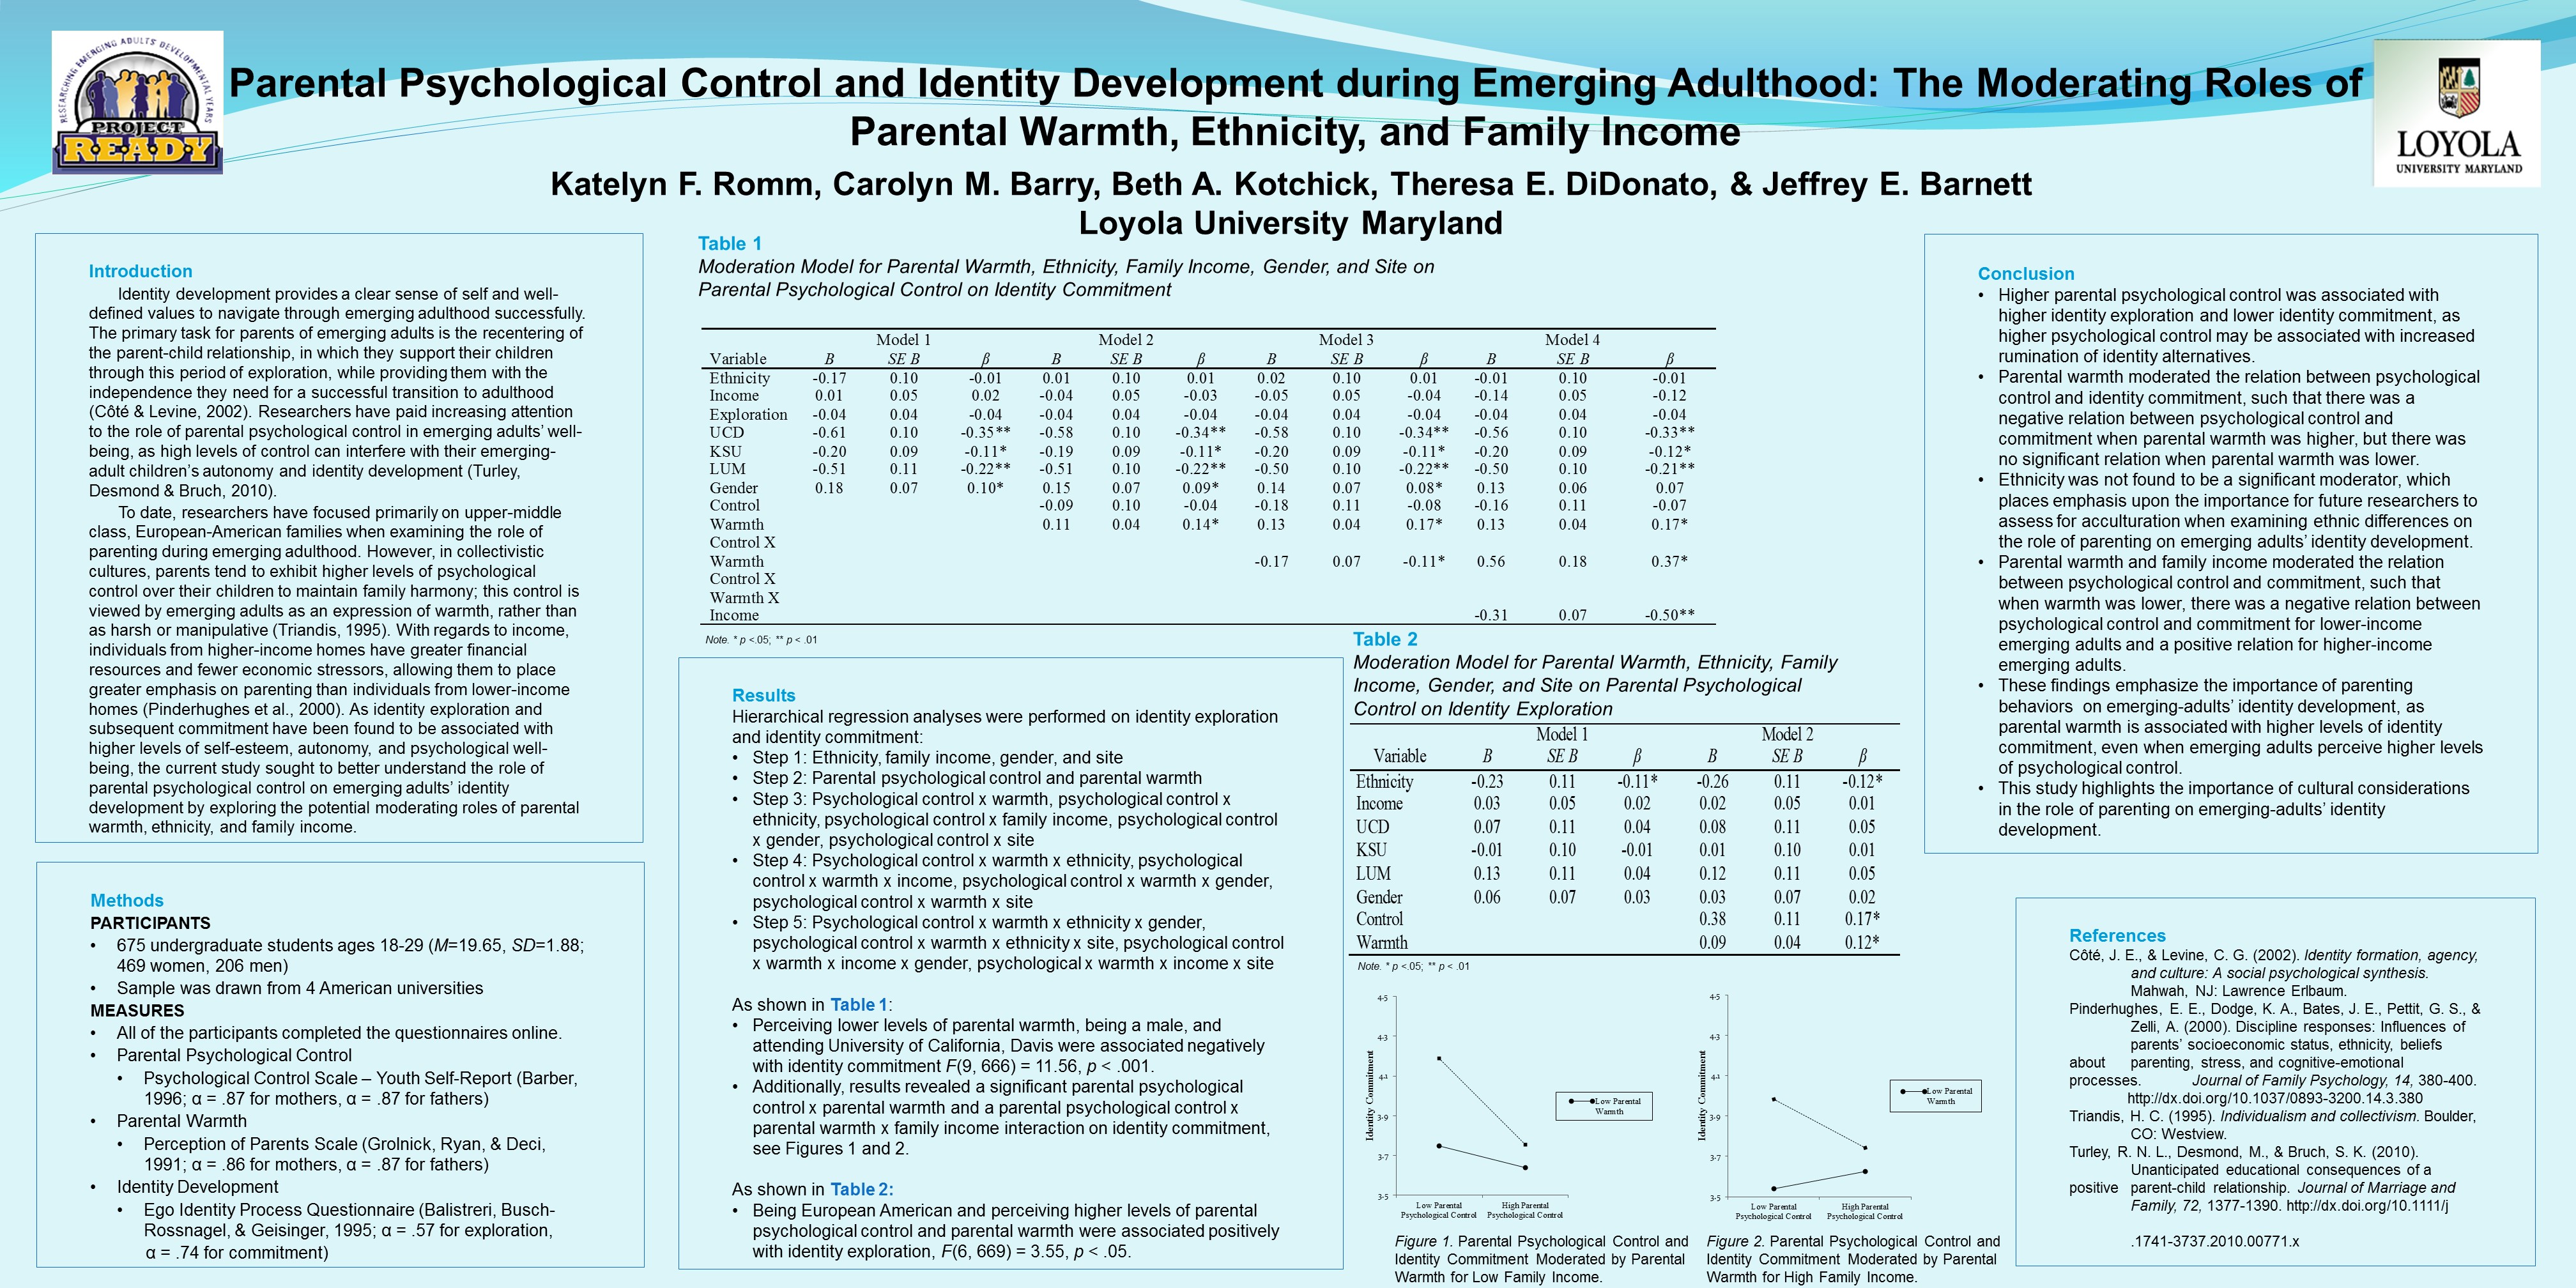 poster image: Parental Psychological Control and Identity Development during Emerging Adulthood: The Moderating Roles of Parental Warmth, Ethnicity, and Family Income